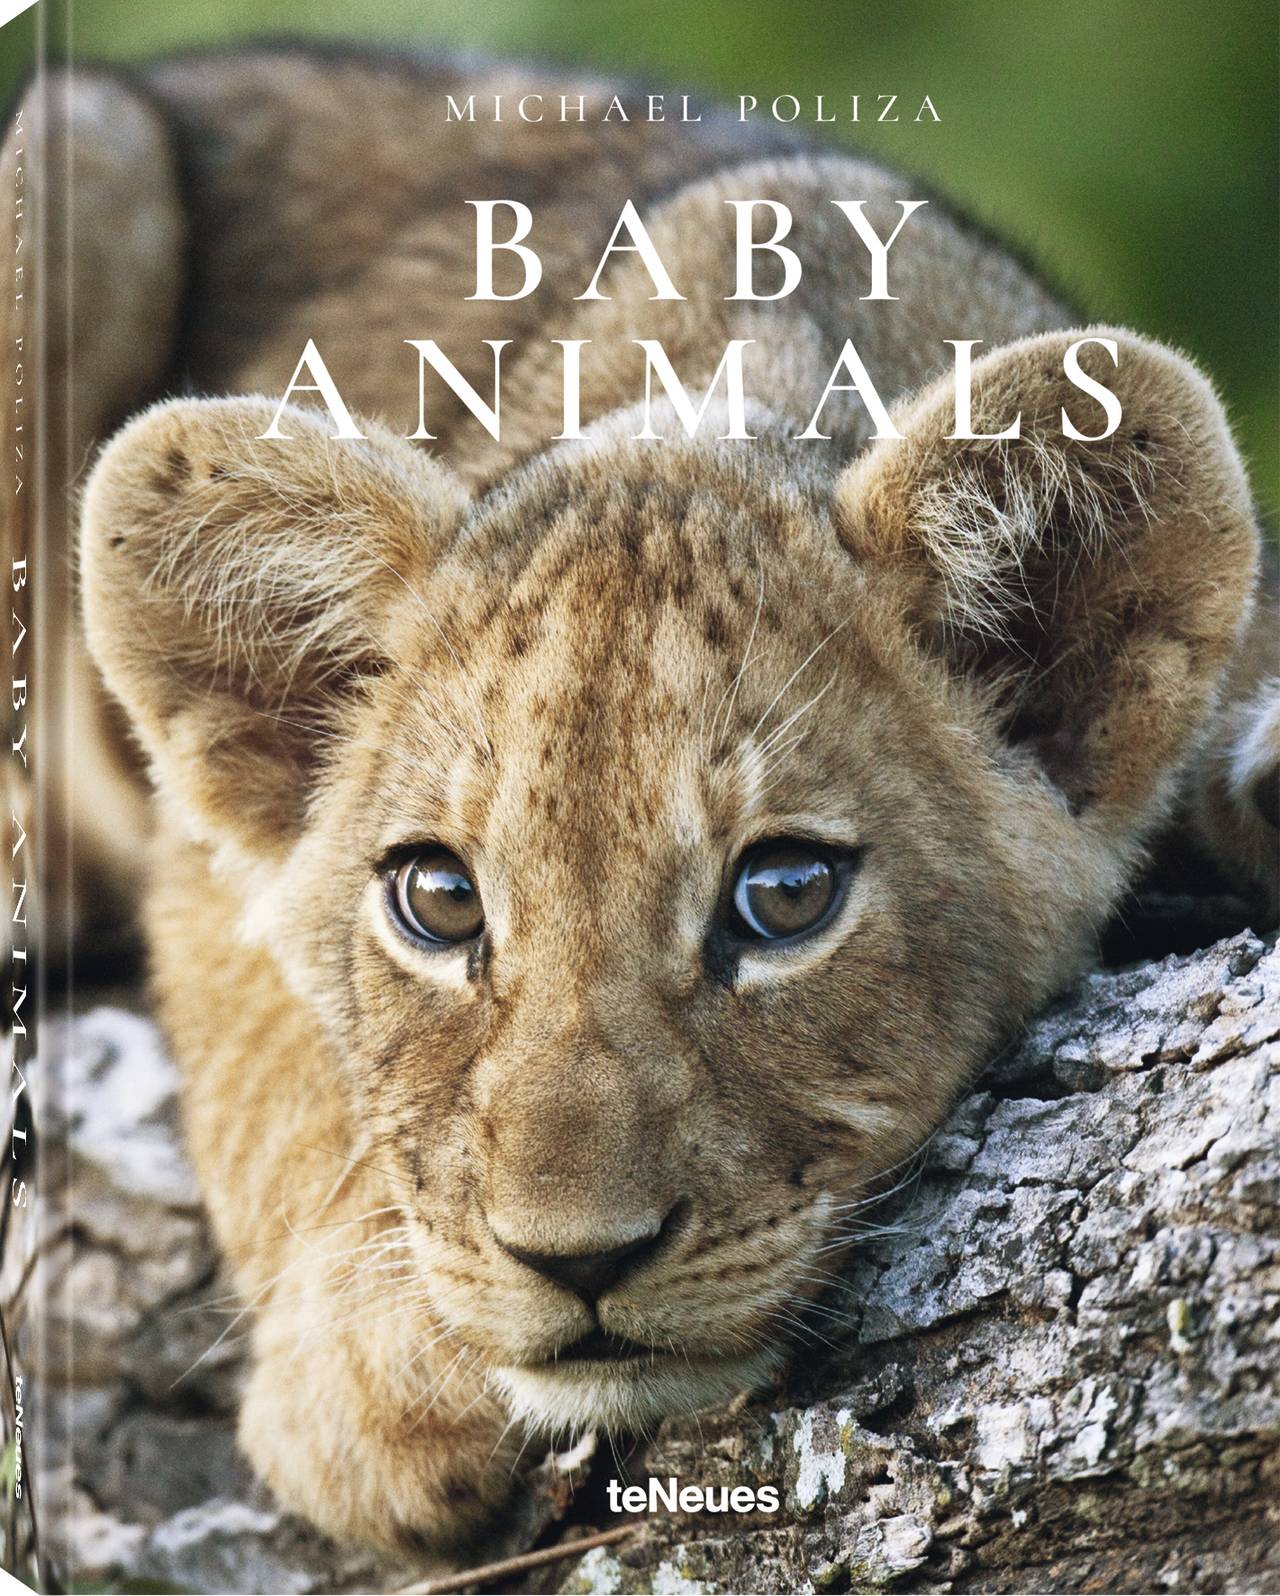 Baby Animals by Michael Poliza illustrated book cover